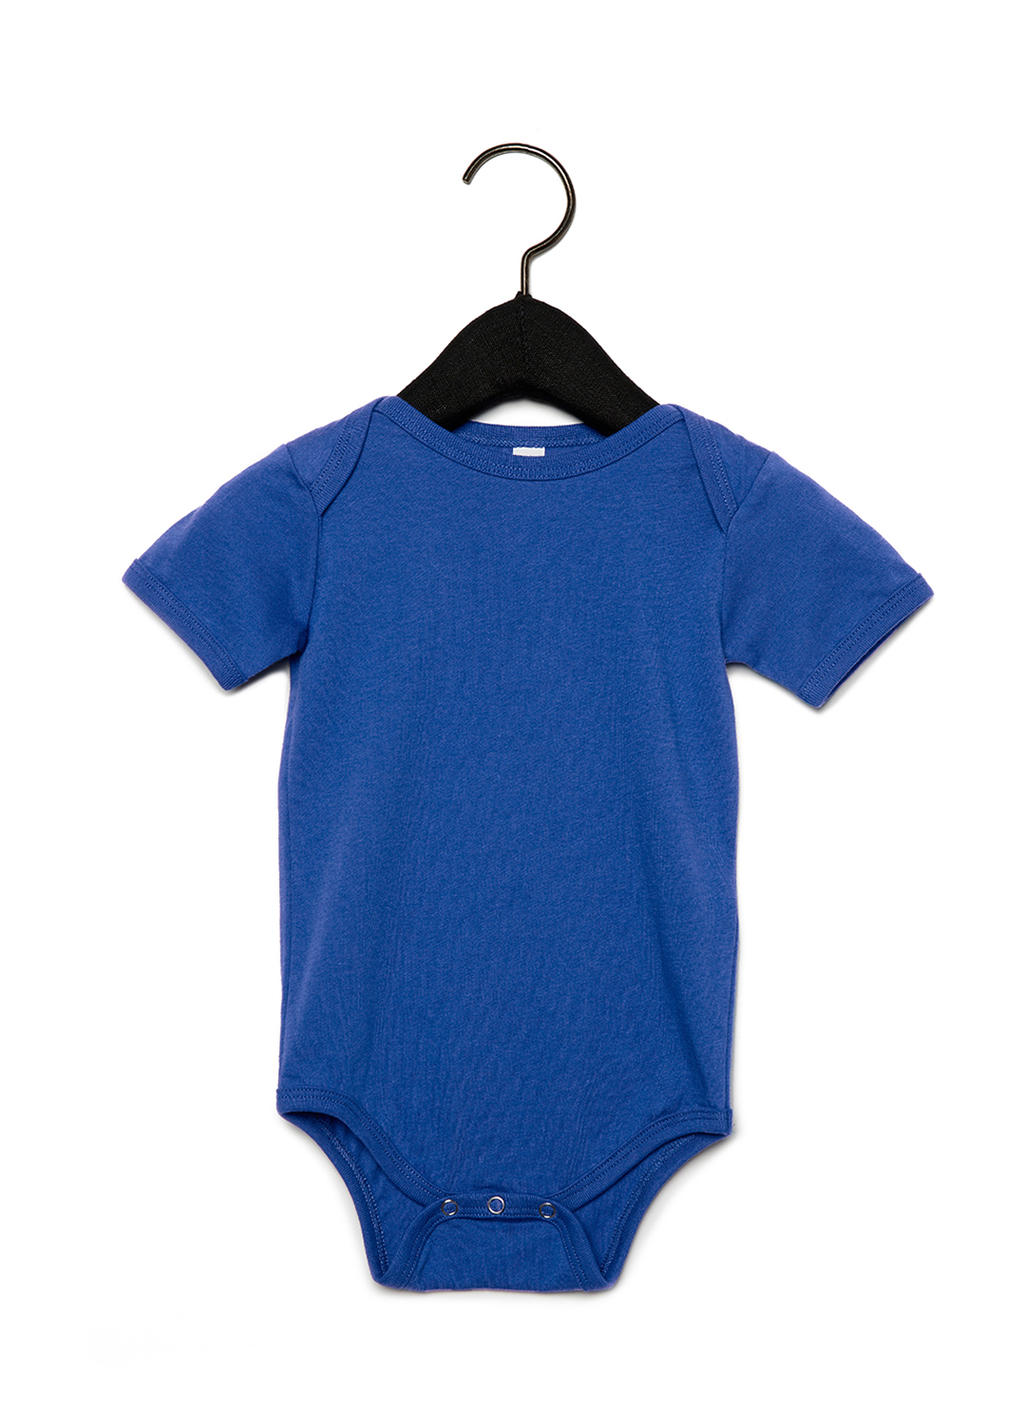  Baby Jersey Short Sleeve One Piece in Farbe True Royal